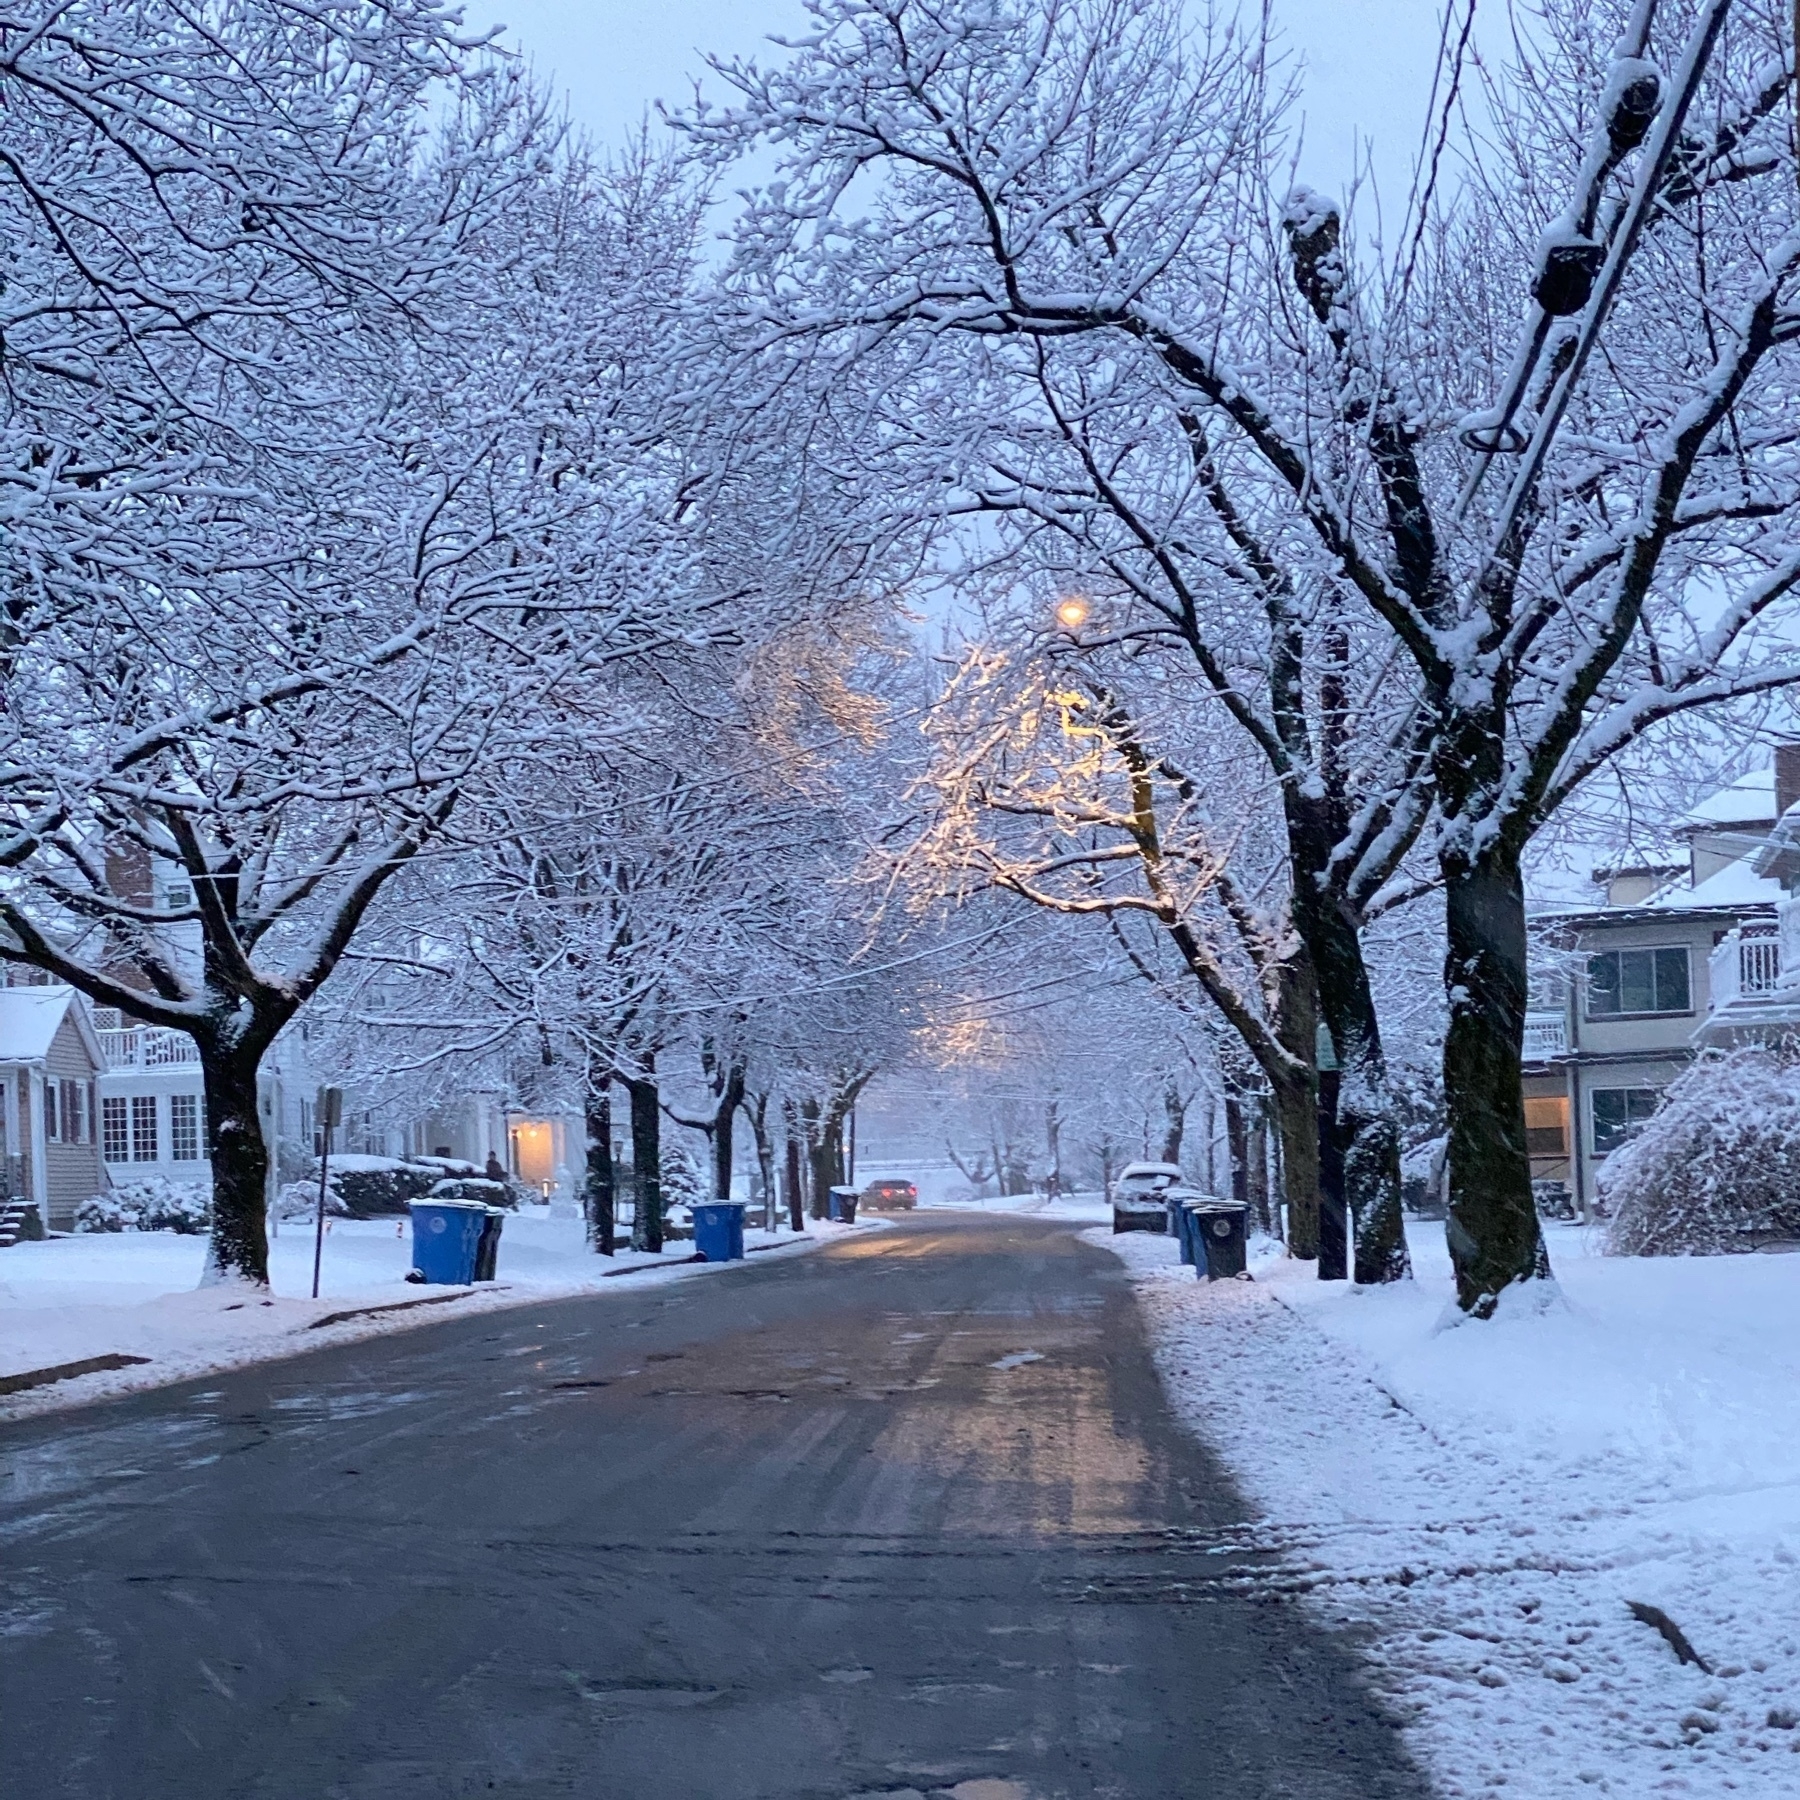 View of a street in the evening woth snow covering the adjacent trees and sidewalks.